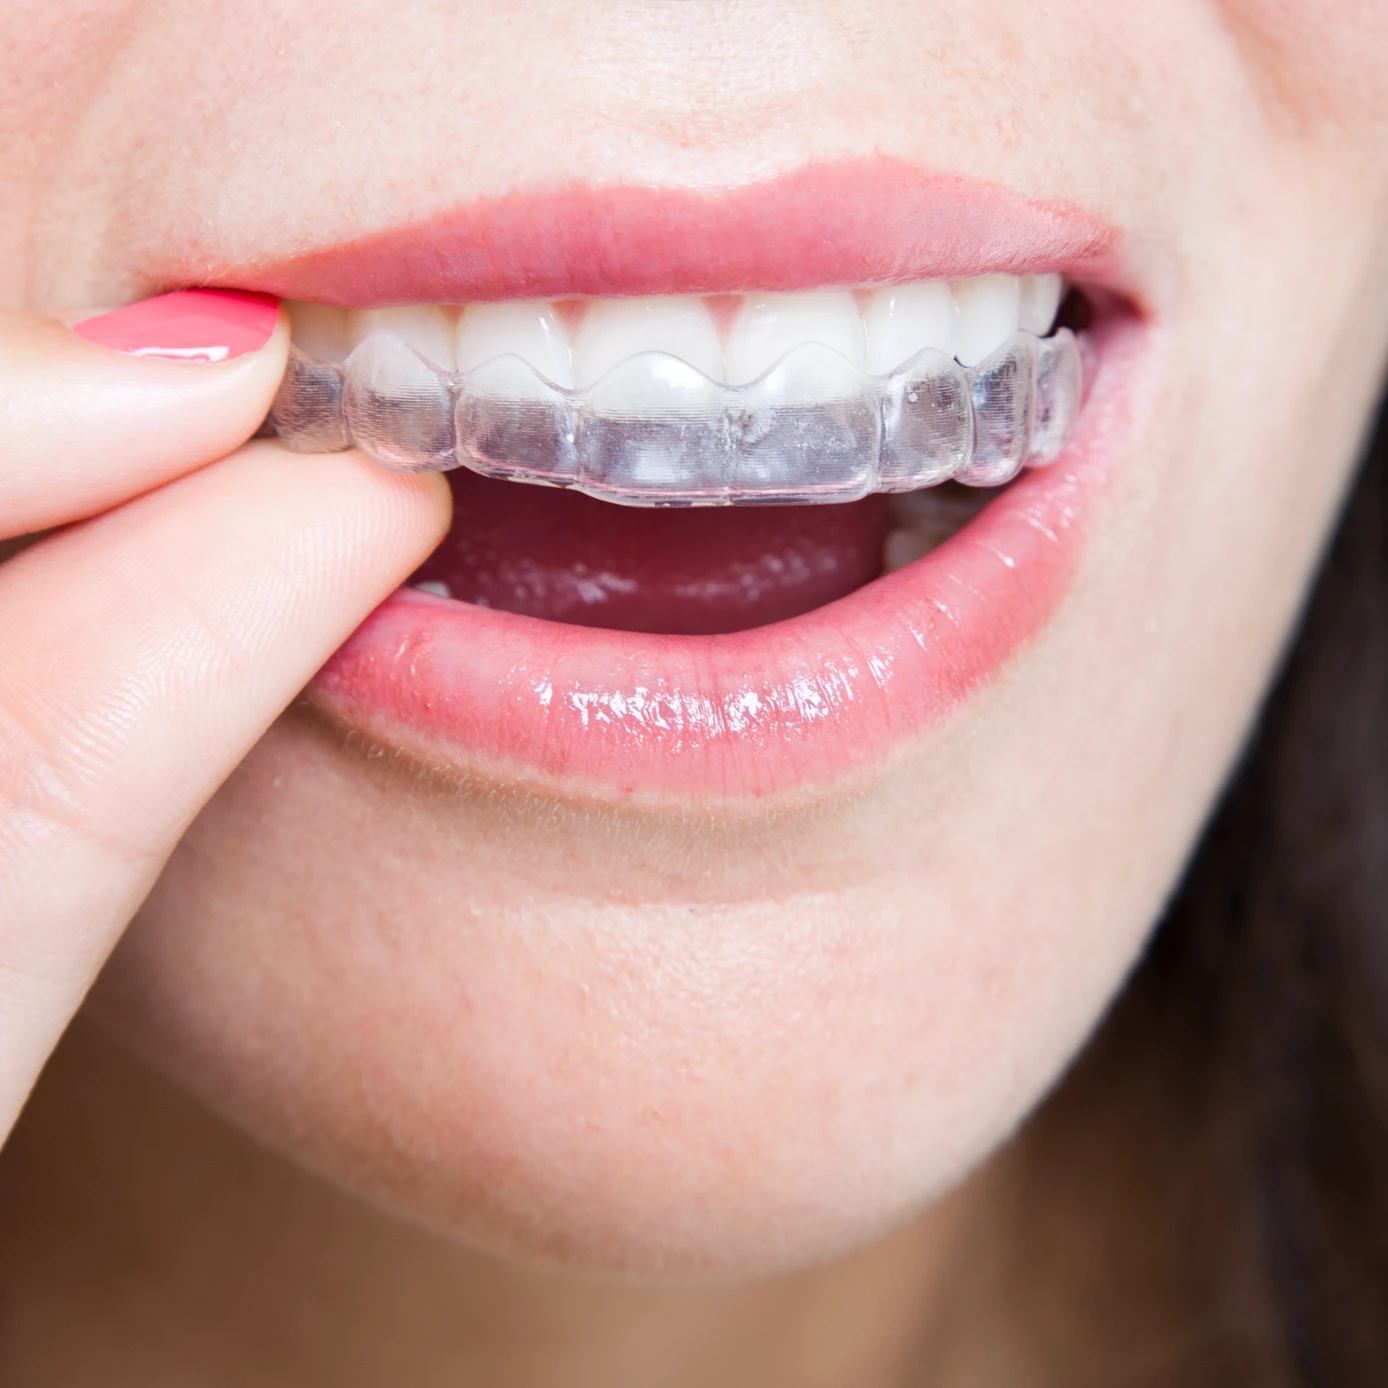 woman putting on invisalign clear aligners to straighten her teeth without braces